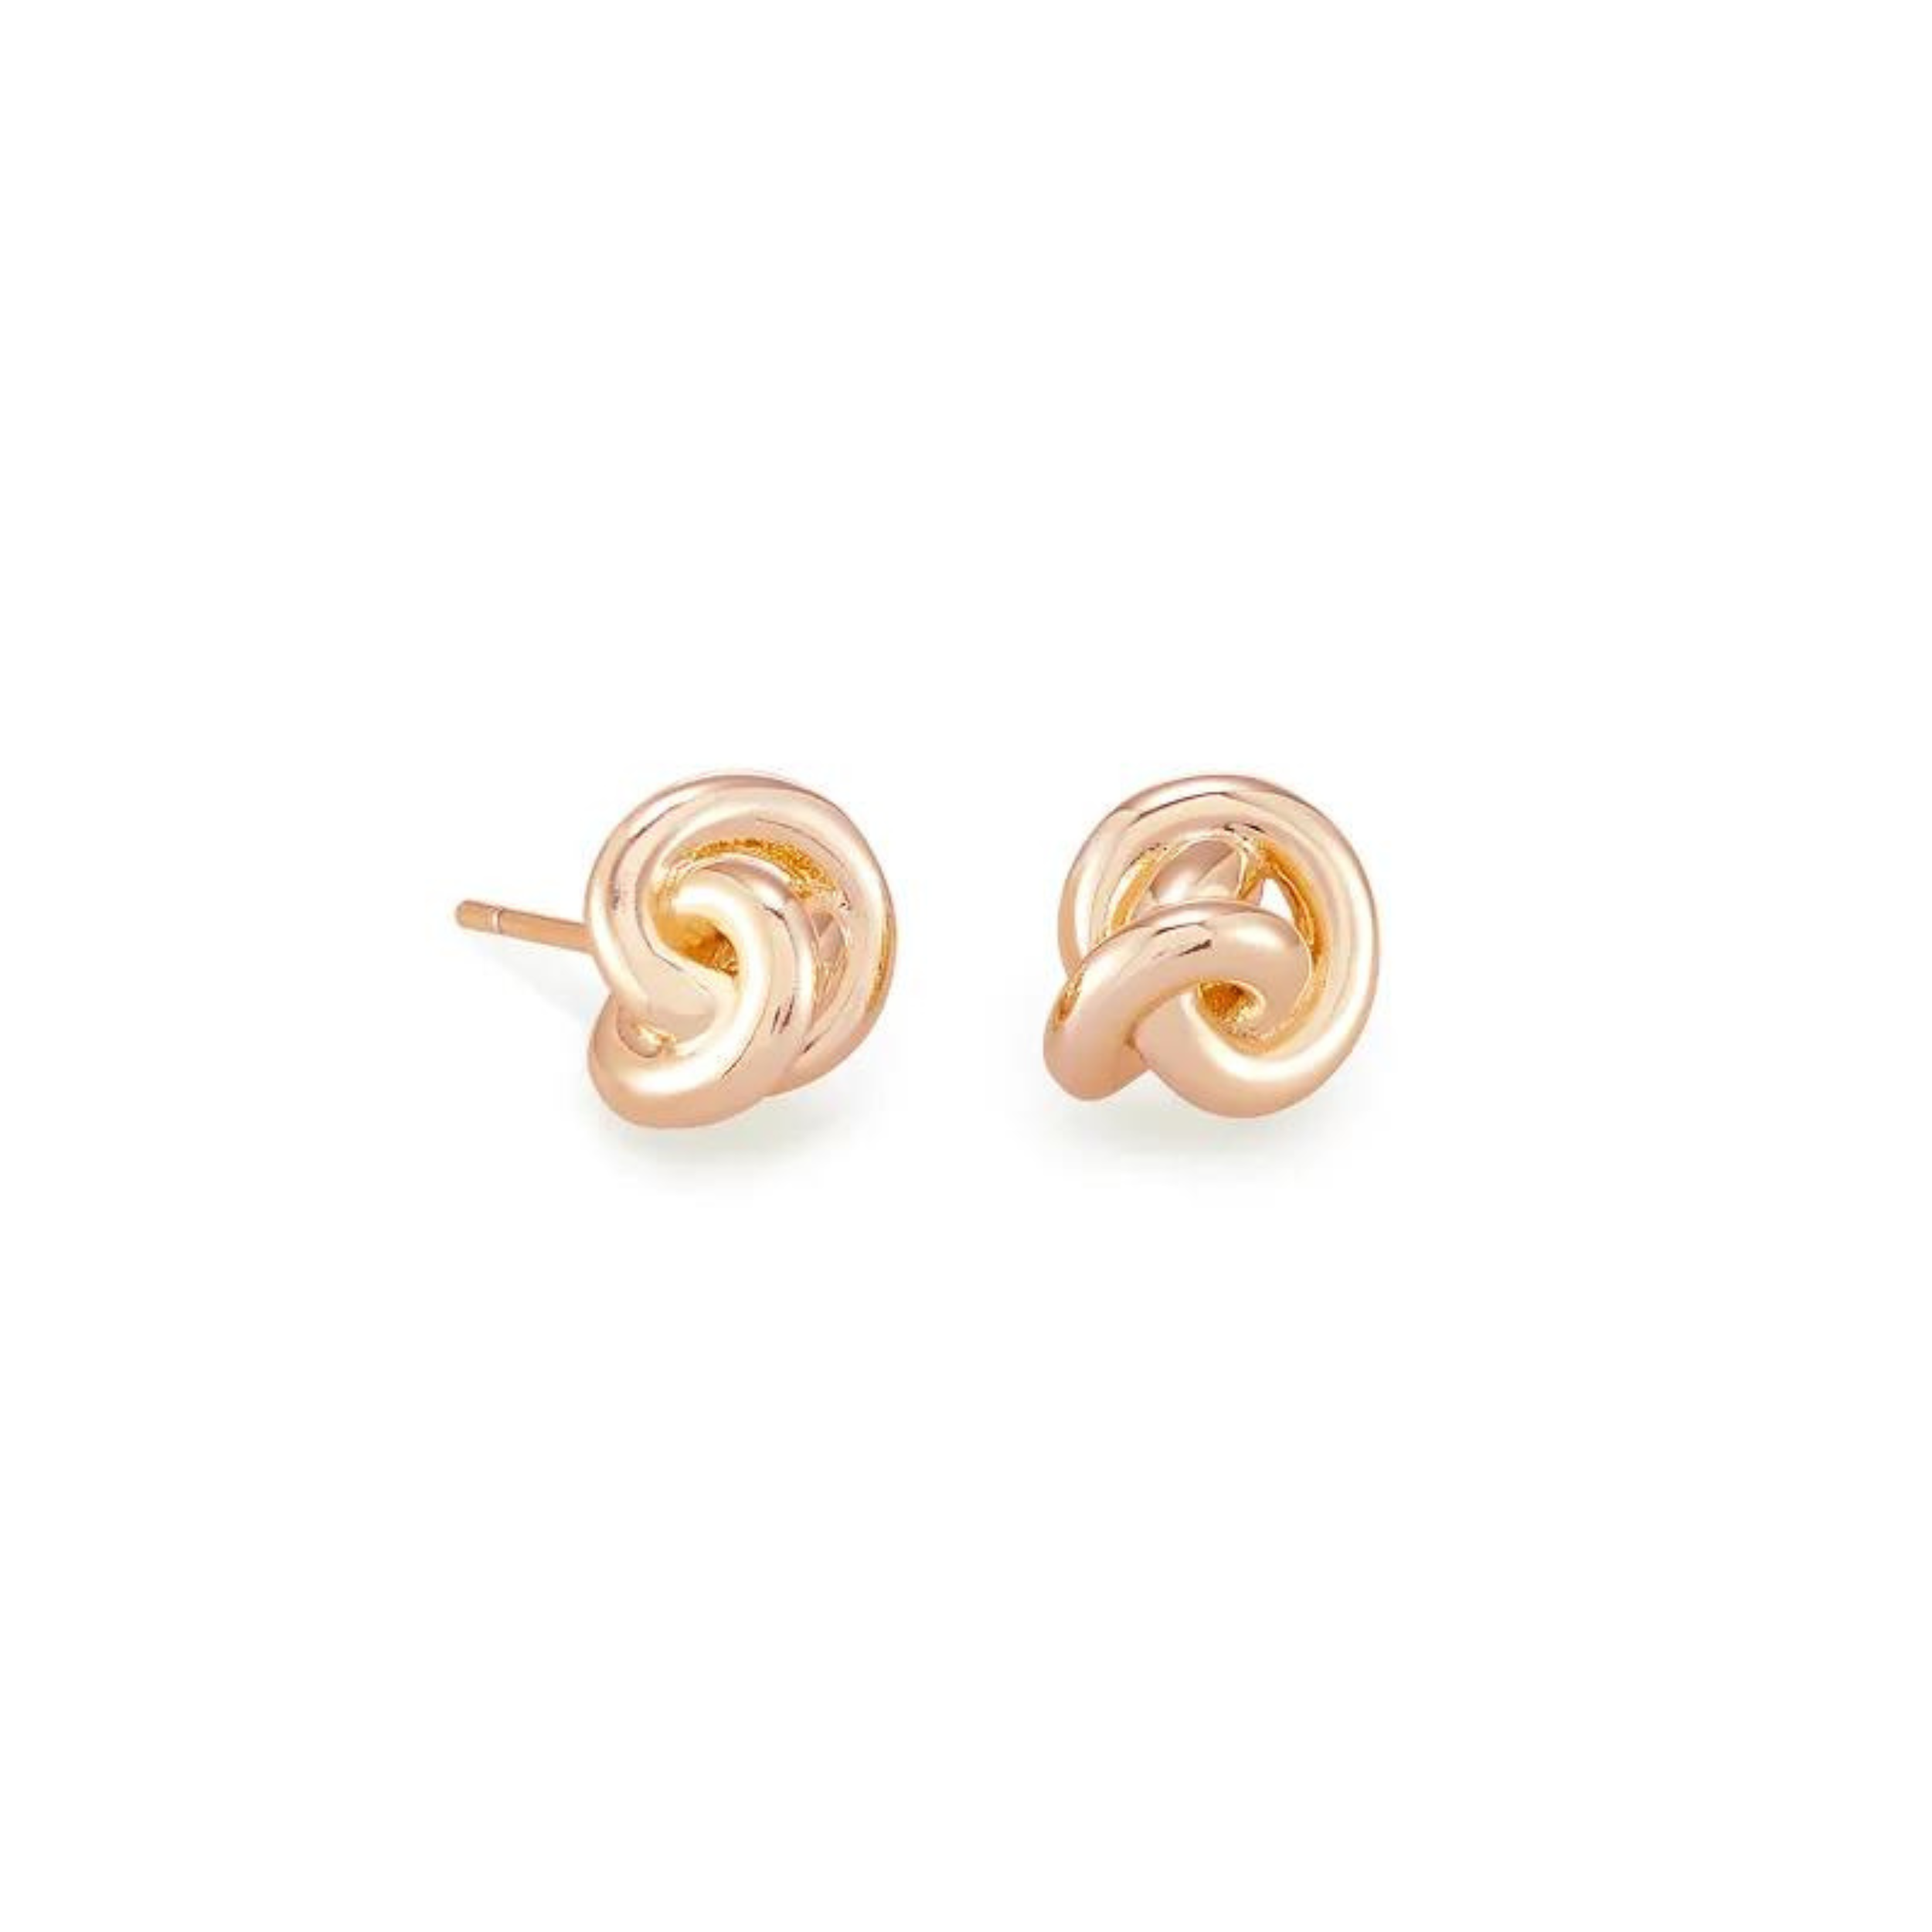 Rose gold knot studs, pictured on a white background.